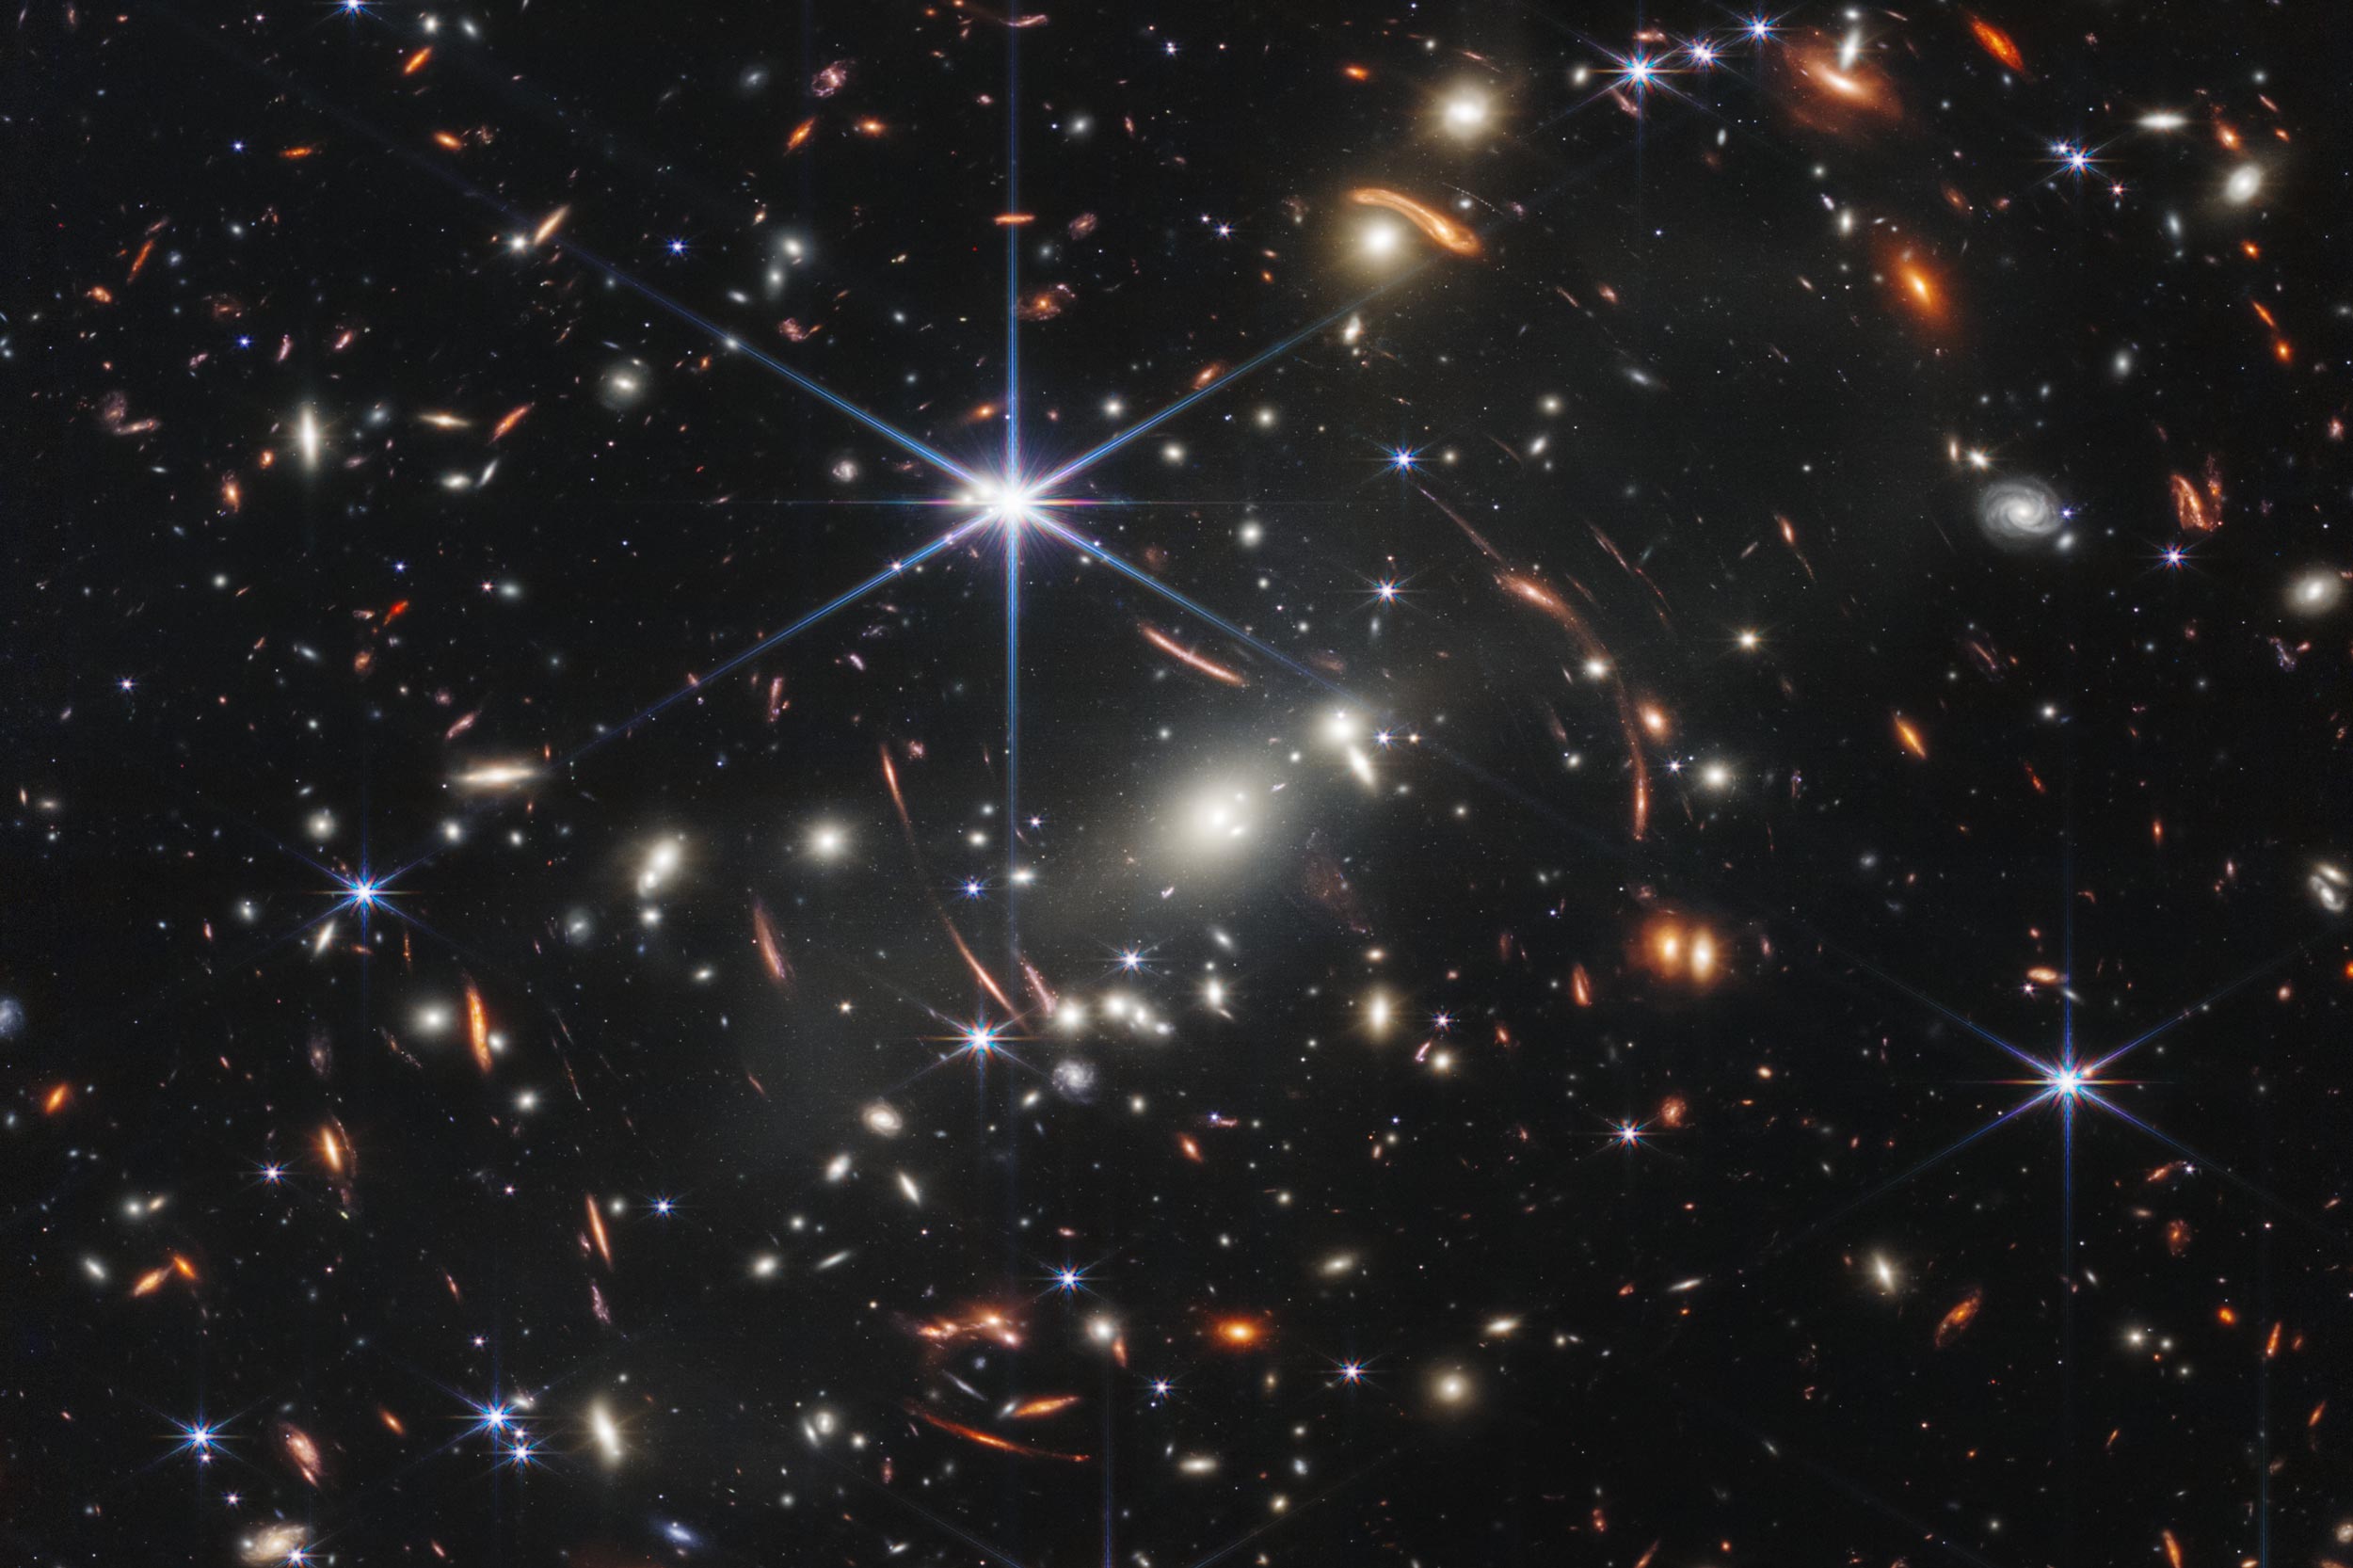 Hundreds of galaxies, including dozens of curved red-orange lines, bending around two bright, white oval galaxies in the center